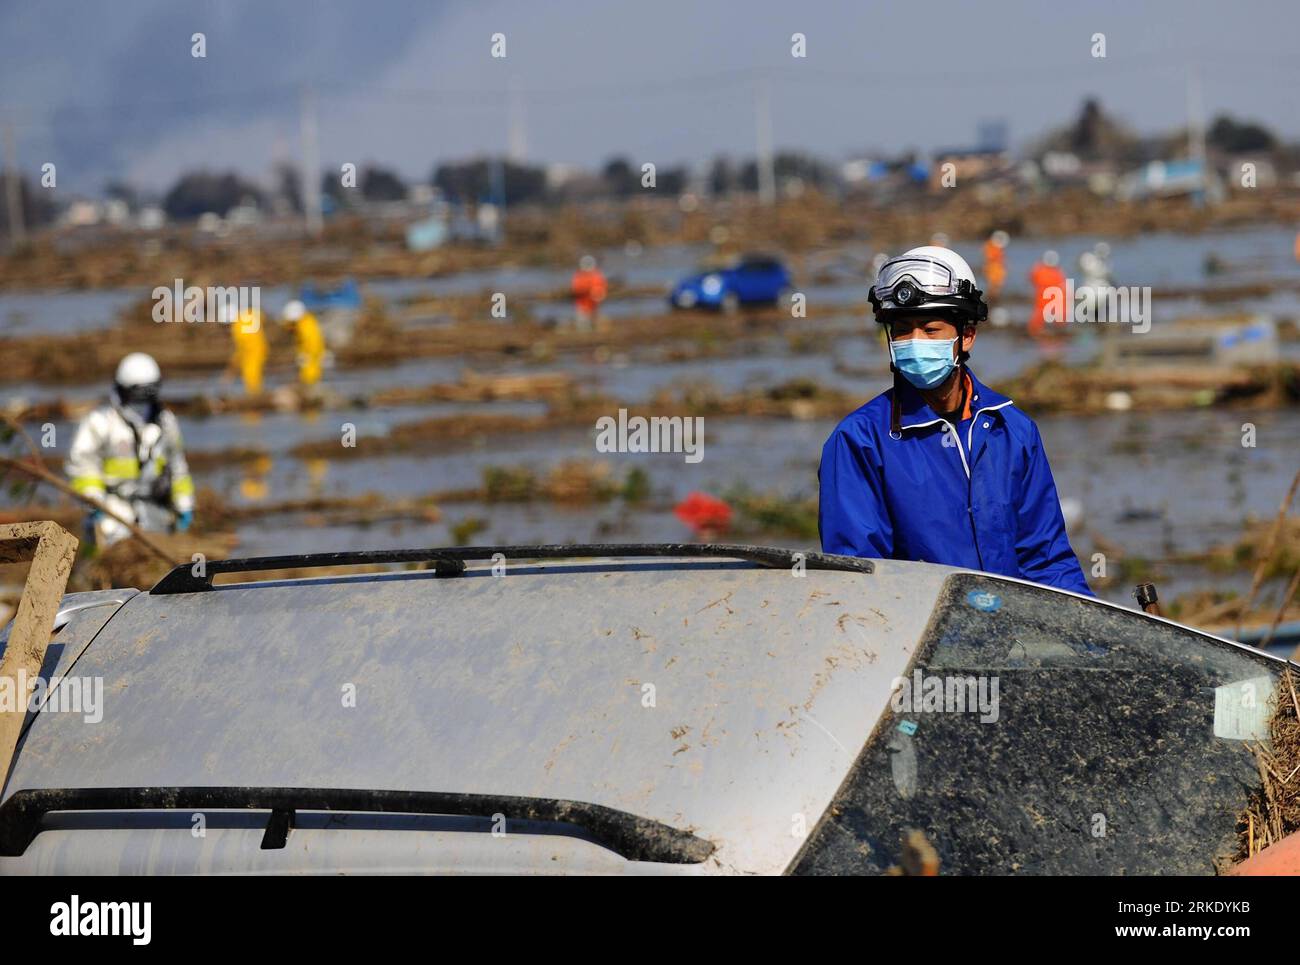 Bildnummer: 55019330  Datum: 13.03.2011  Copyright: imago/Xinhua SENDAI, March 13, 2011 (Xinhua) -- Rescuers search for survivors at Sanbontsuka of Wakabayashi in Sendai City, Miyagi Prefecture, Japan, March 13, 2011. The area lost contact with the outside world after Friday s quake and tsunami. Friday s catastrophic earthquake in Japan and the following devastating tsunami have ravaged the country, while massive rescue and recovery efforts have been quickly launched to save lives and minimize losses. (Xinhua/Ji Chunpeng)(yc) JAPAN-QUAKE PUBLICATIONxNOTxINxCHN Gesellschaft Naturkatastrophe Erd Stock Photo